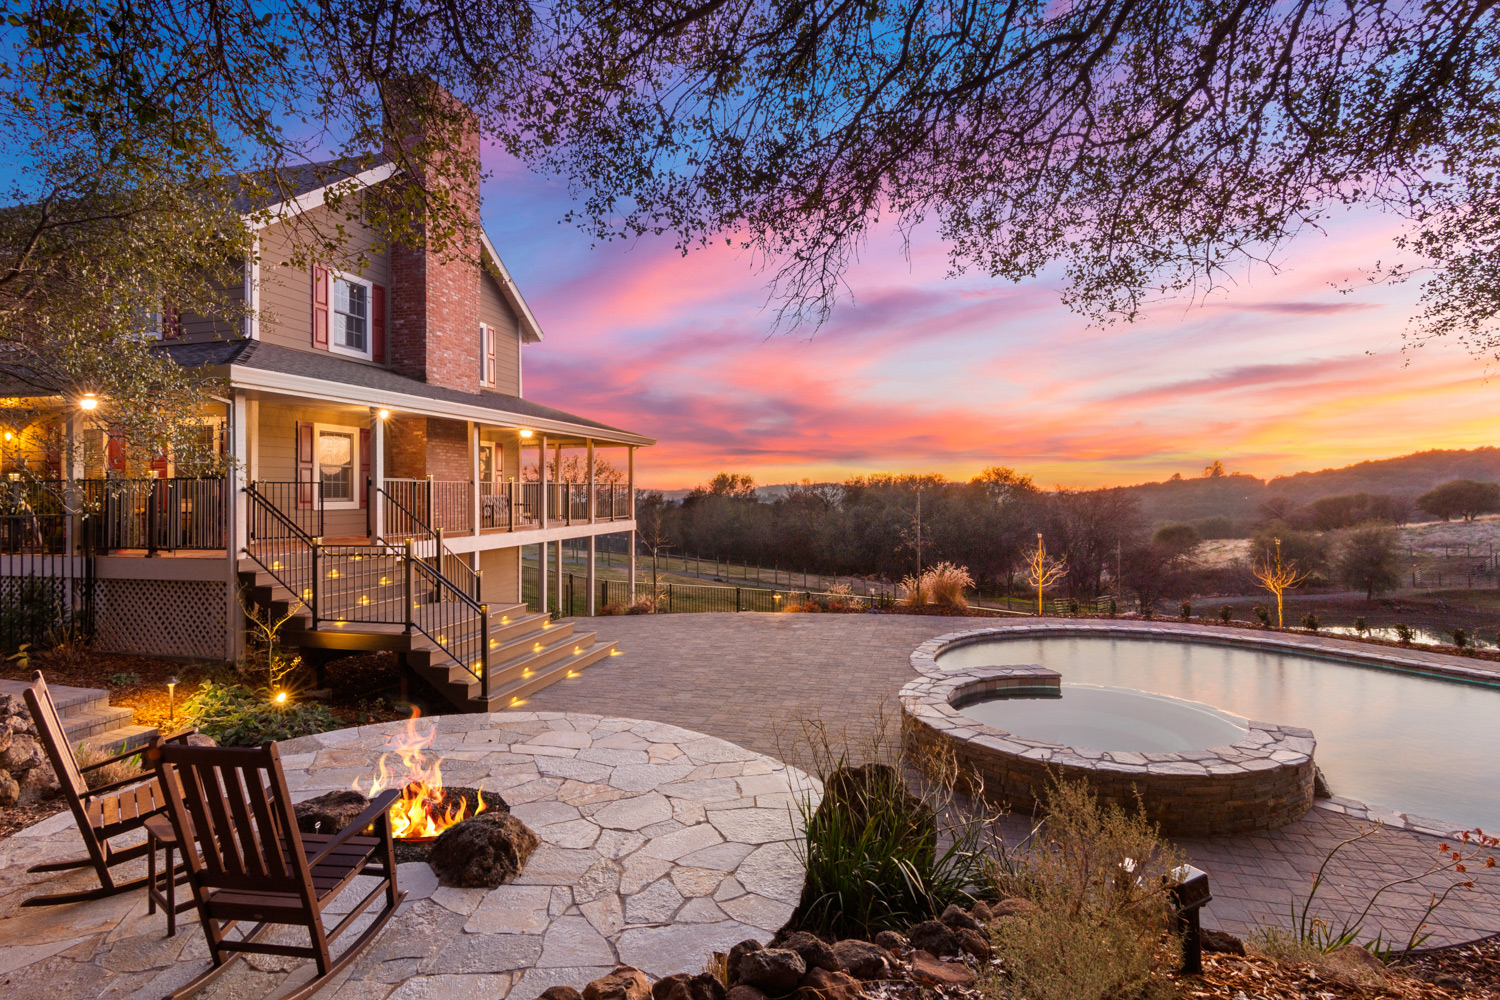 Patio behind home with a colorful sunset over a serene fireplace.